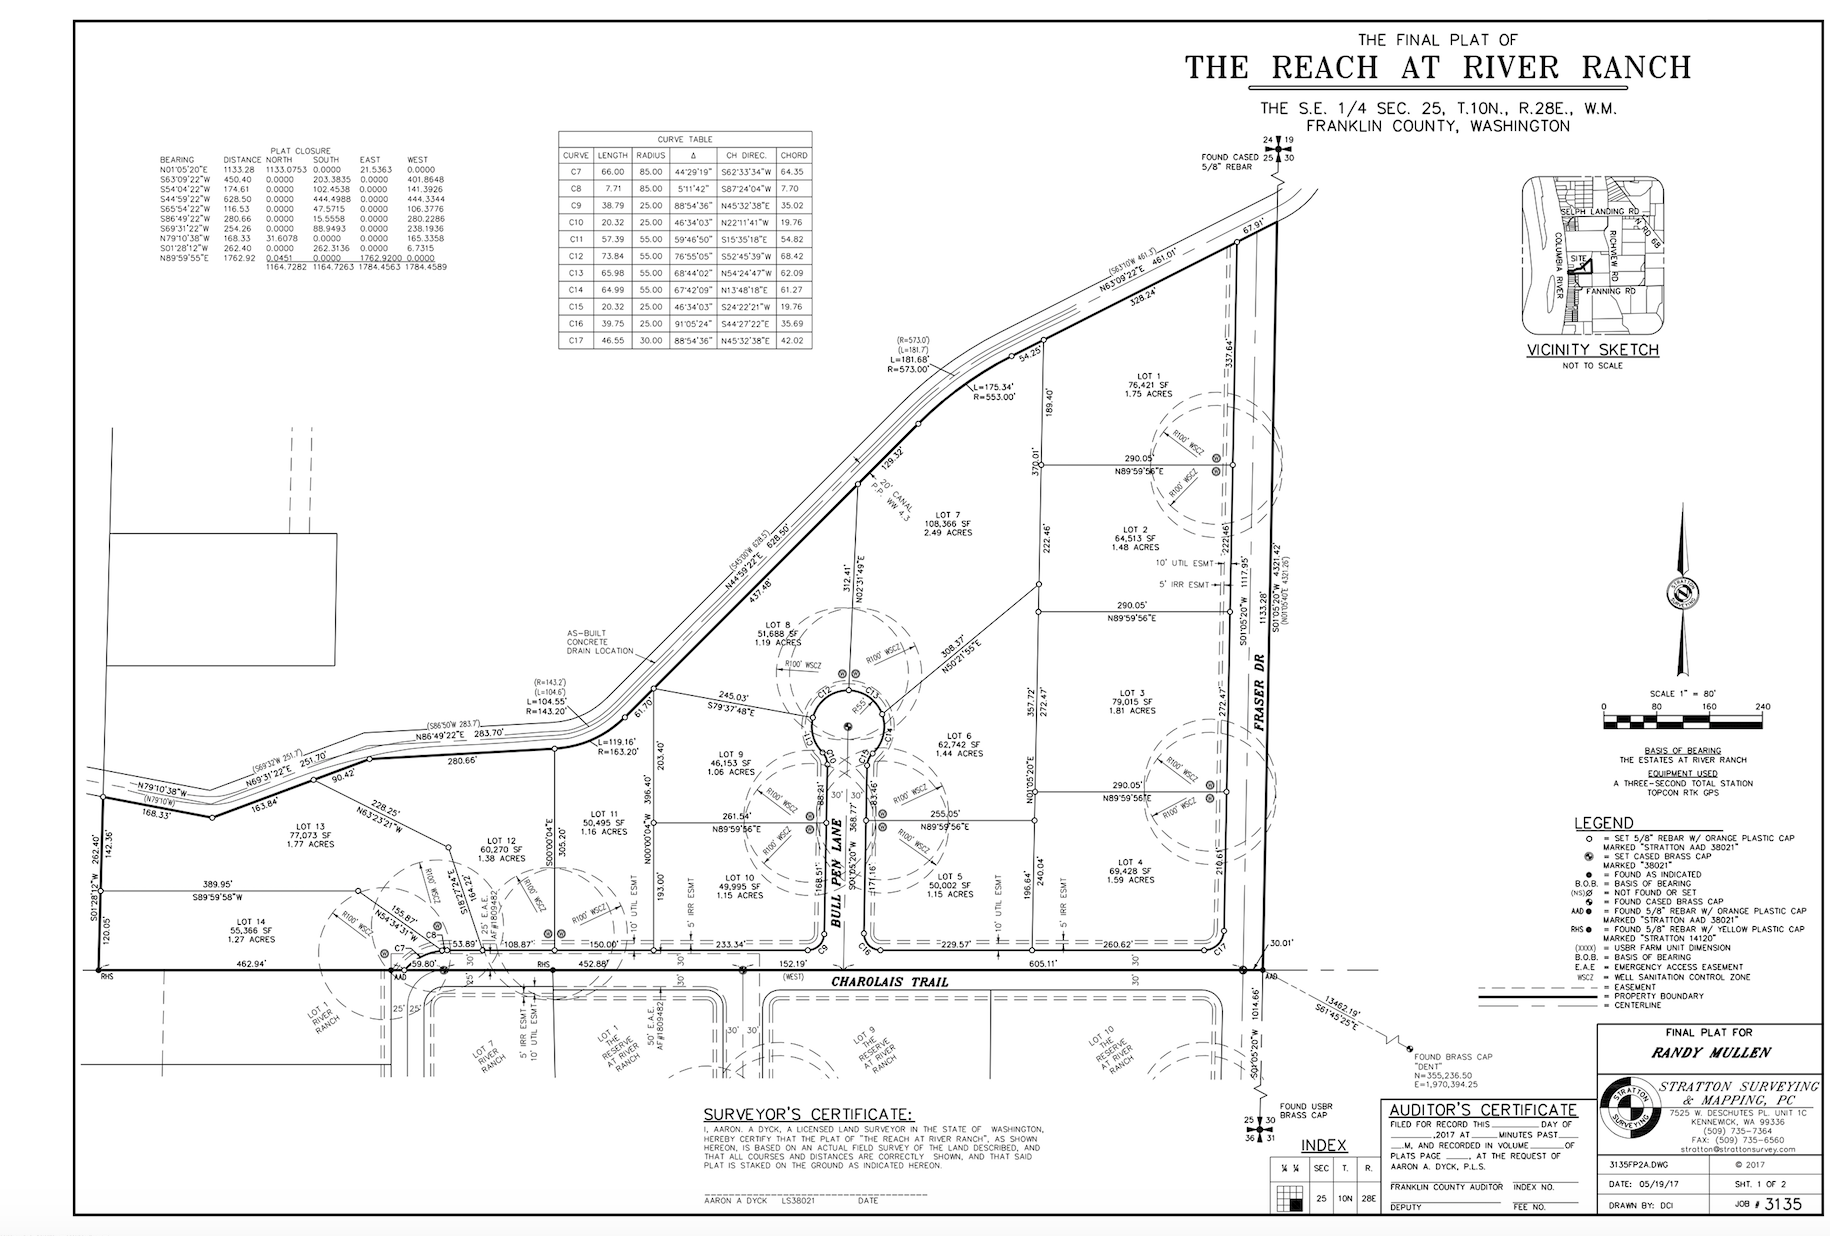 The Reach at River Ranch Plat Map - April Connors